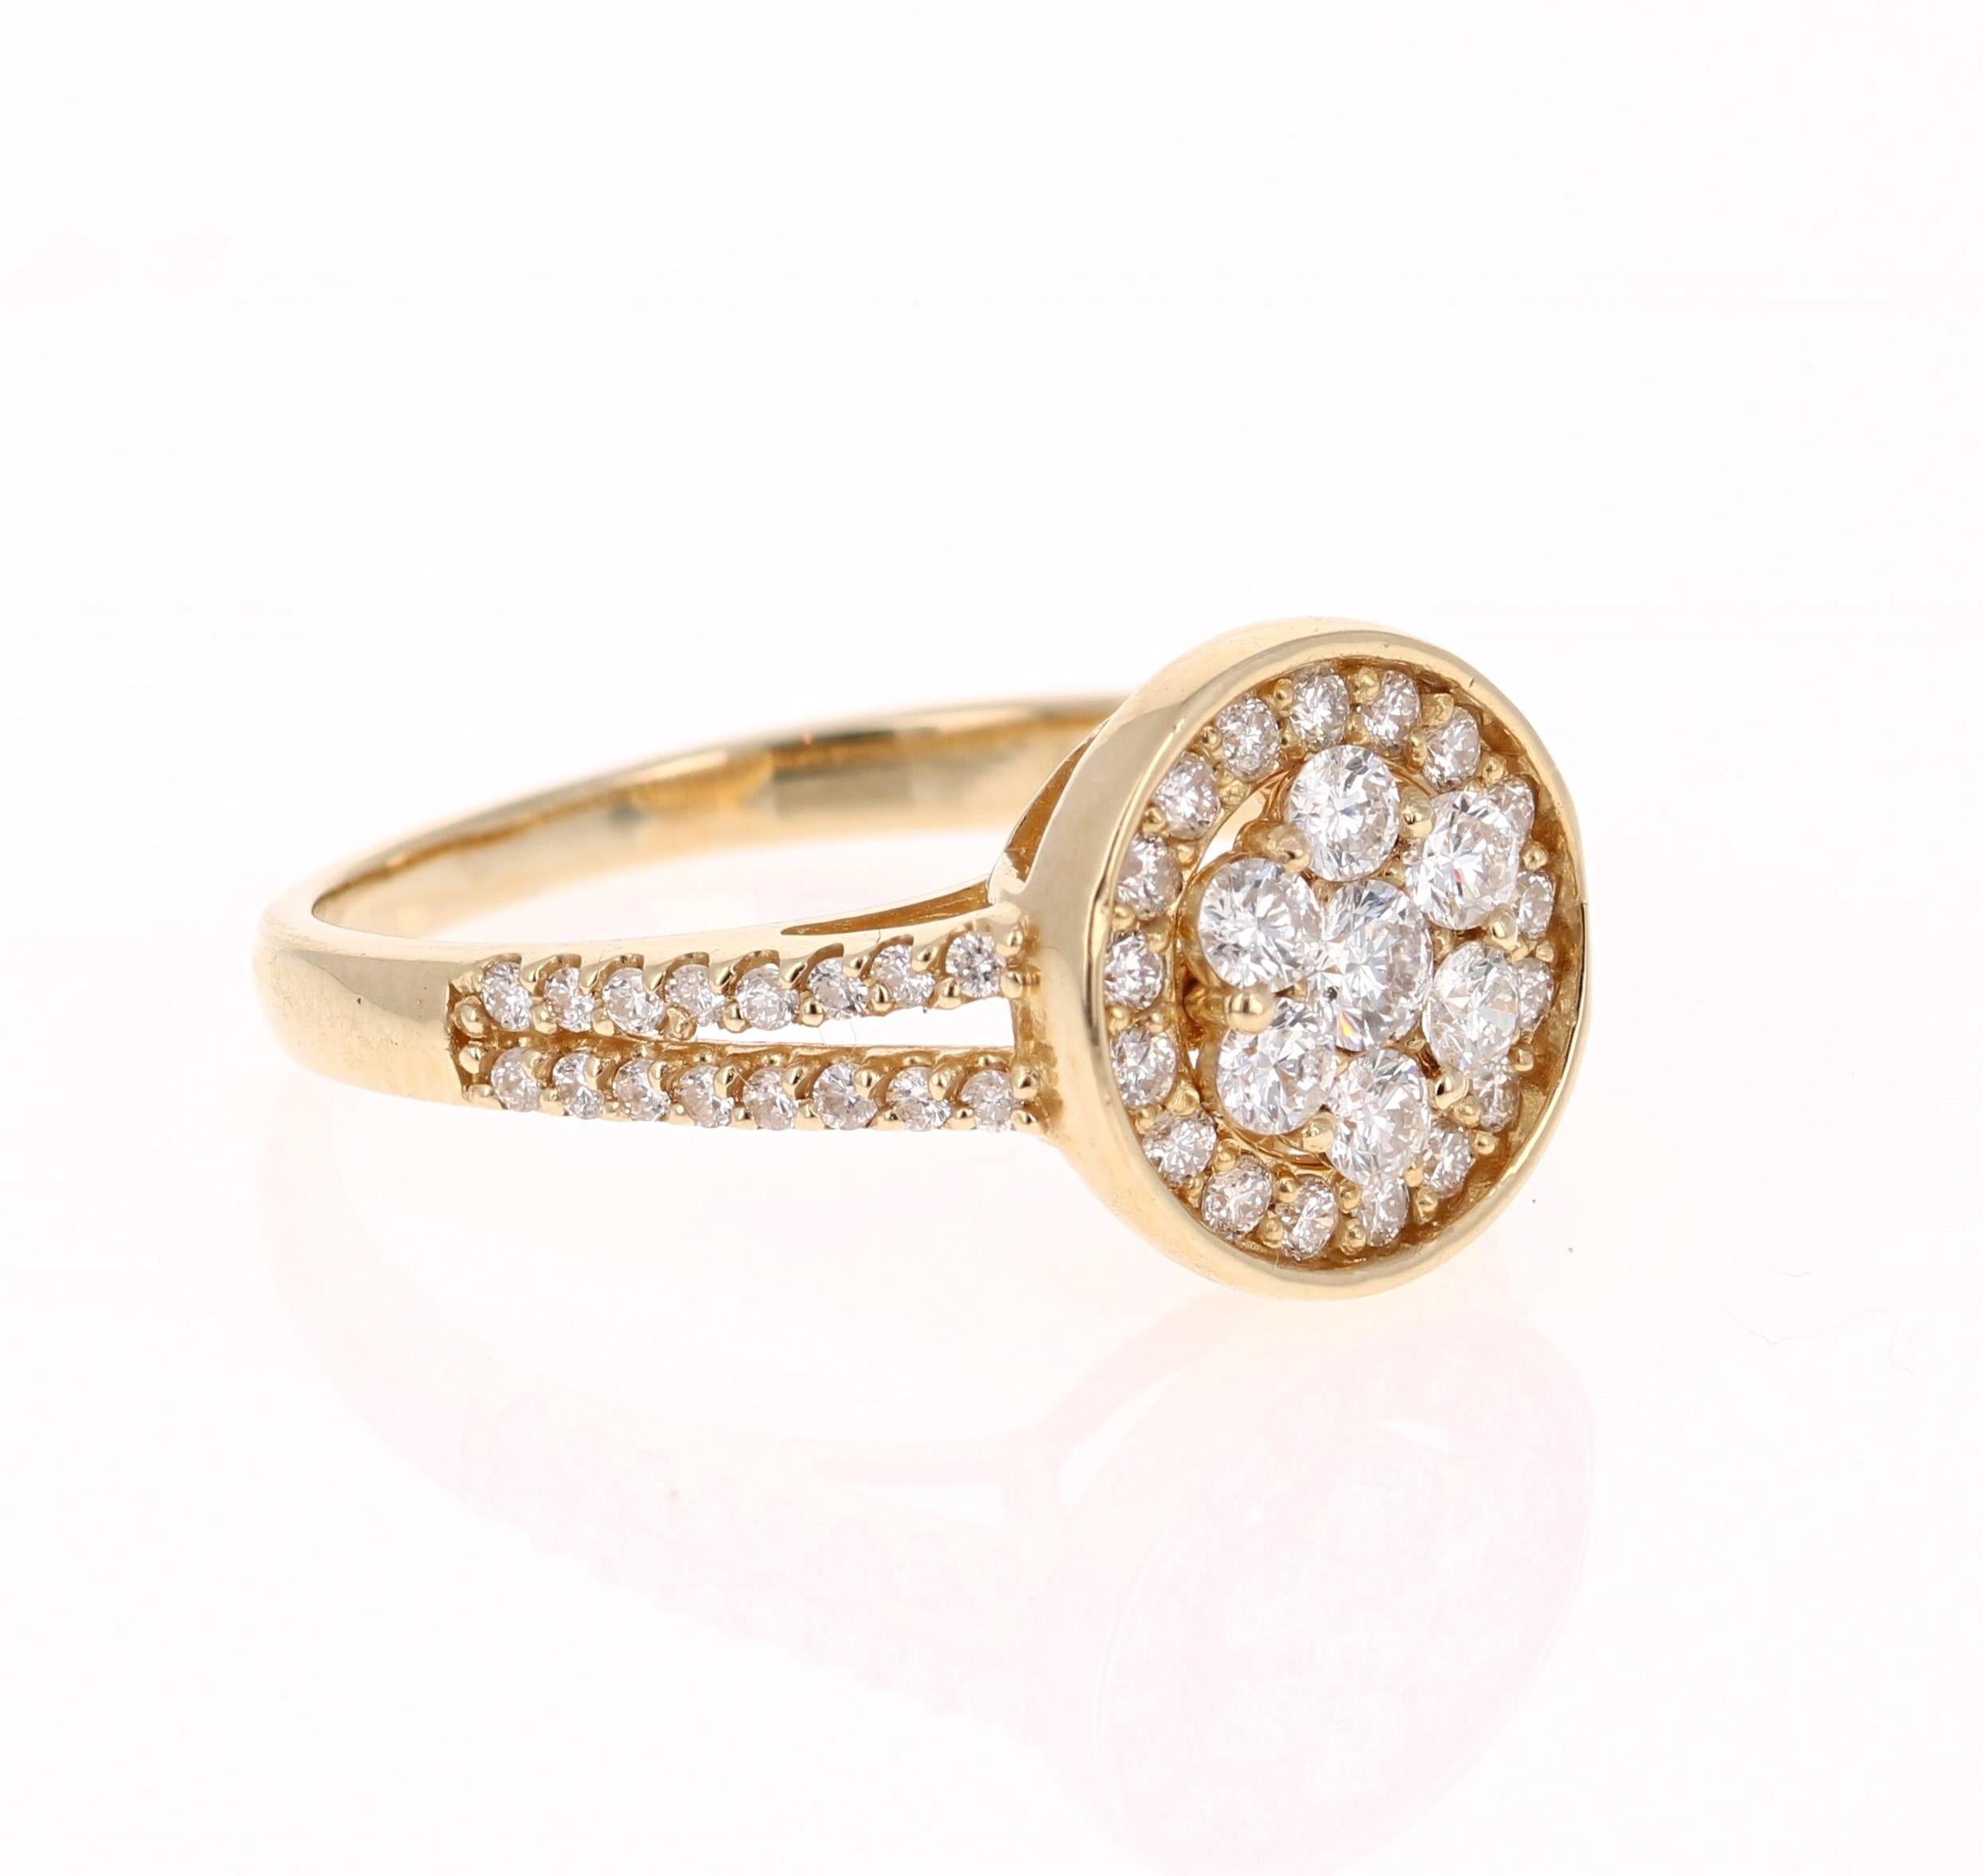 This ring has 56 Round Cut Diamonds that weigh 0.68 Carats. 

It is beautifully set in 14 Karat Yellow Gold and weighs approximately 3.0 grams

The ring is a size 6 1/2 and can be re-sized free of charge. 
